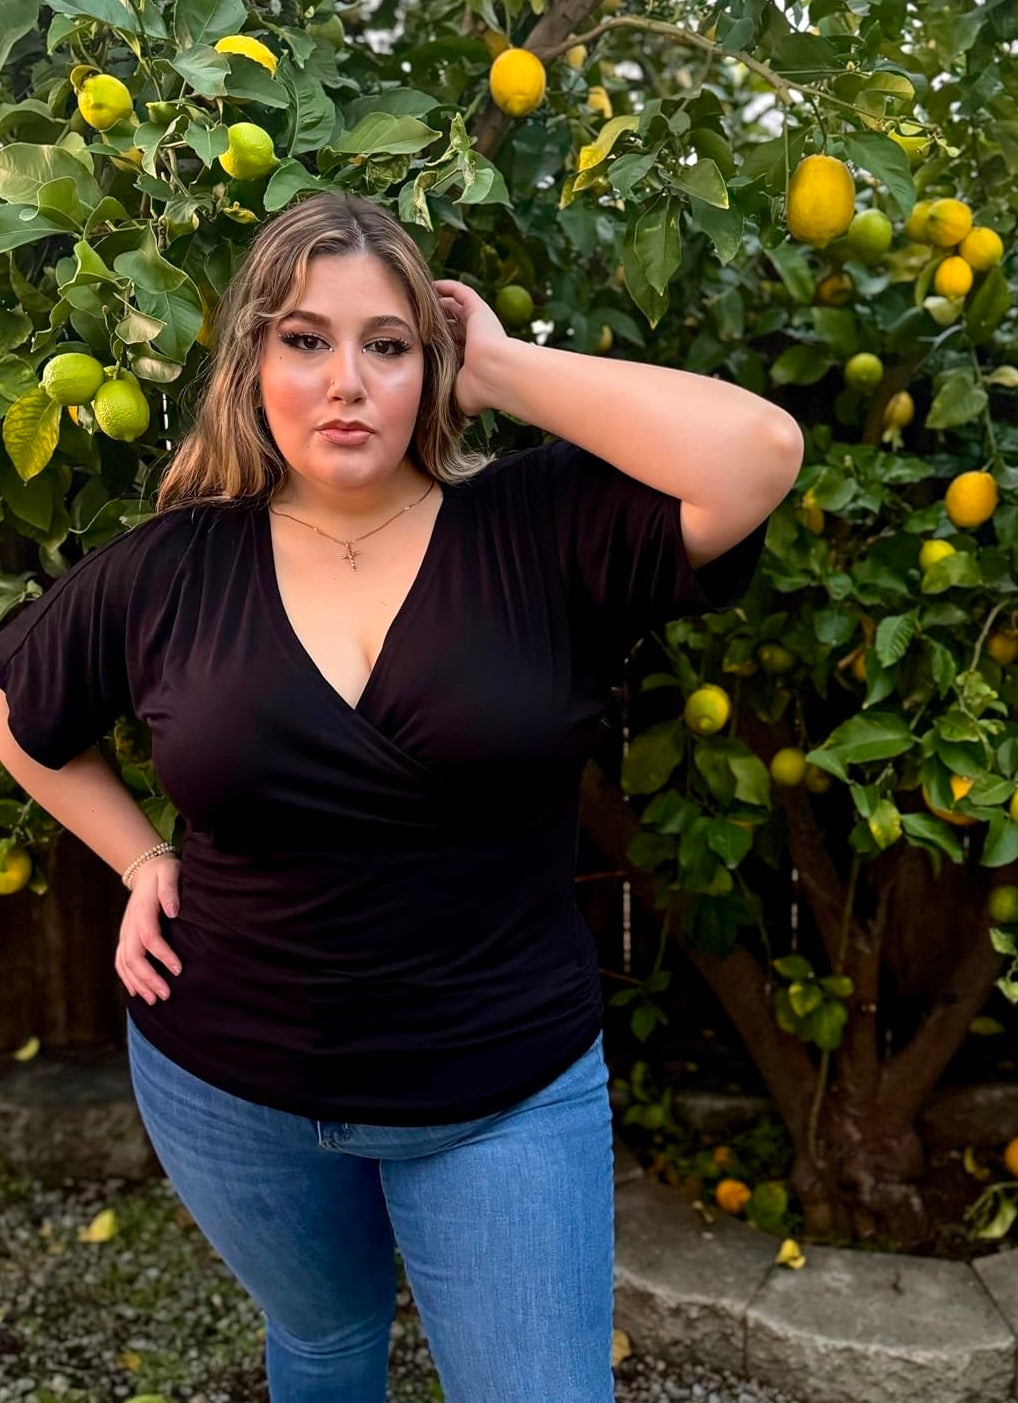 reviewer in a dark V-neck top and jeans poses with hand in hair by a lemon tree